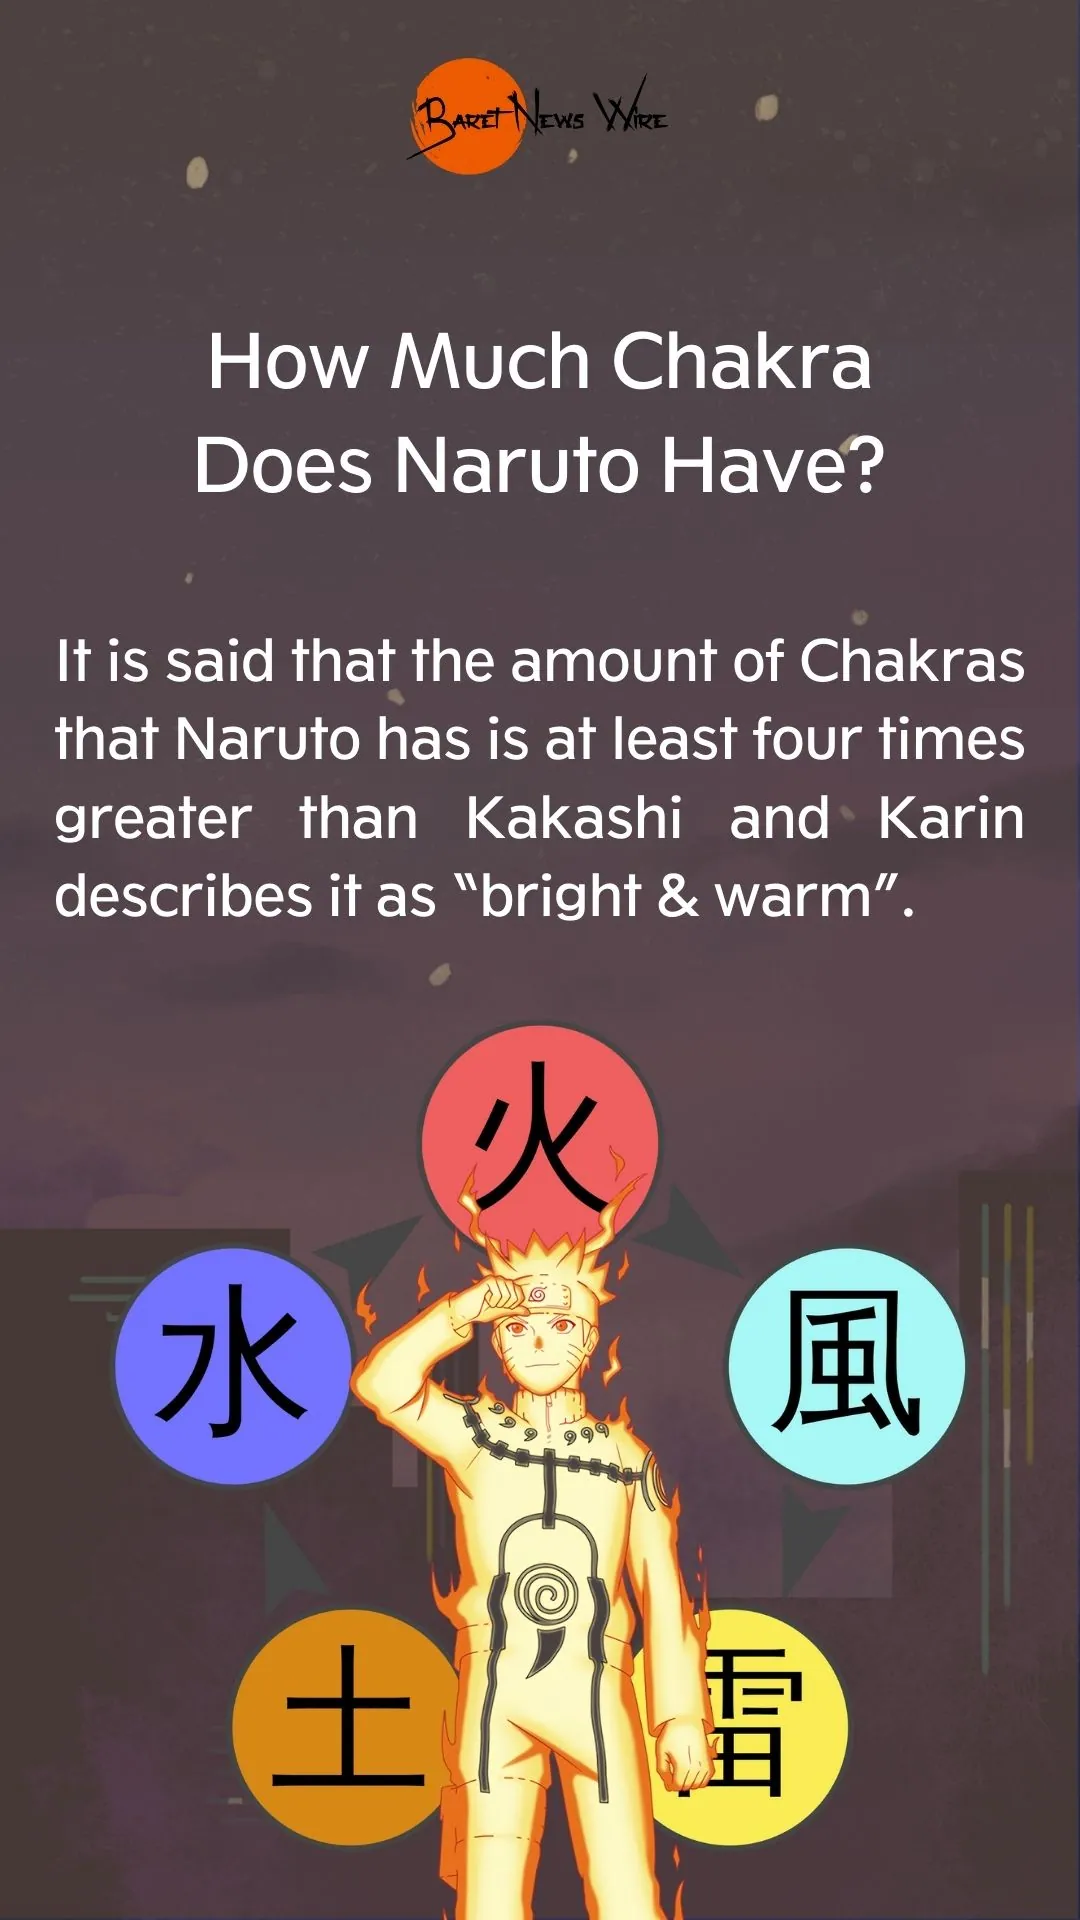 How Much Chakra Does Naruto Have